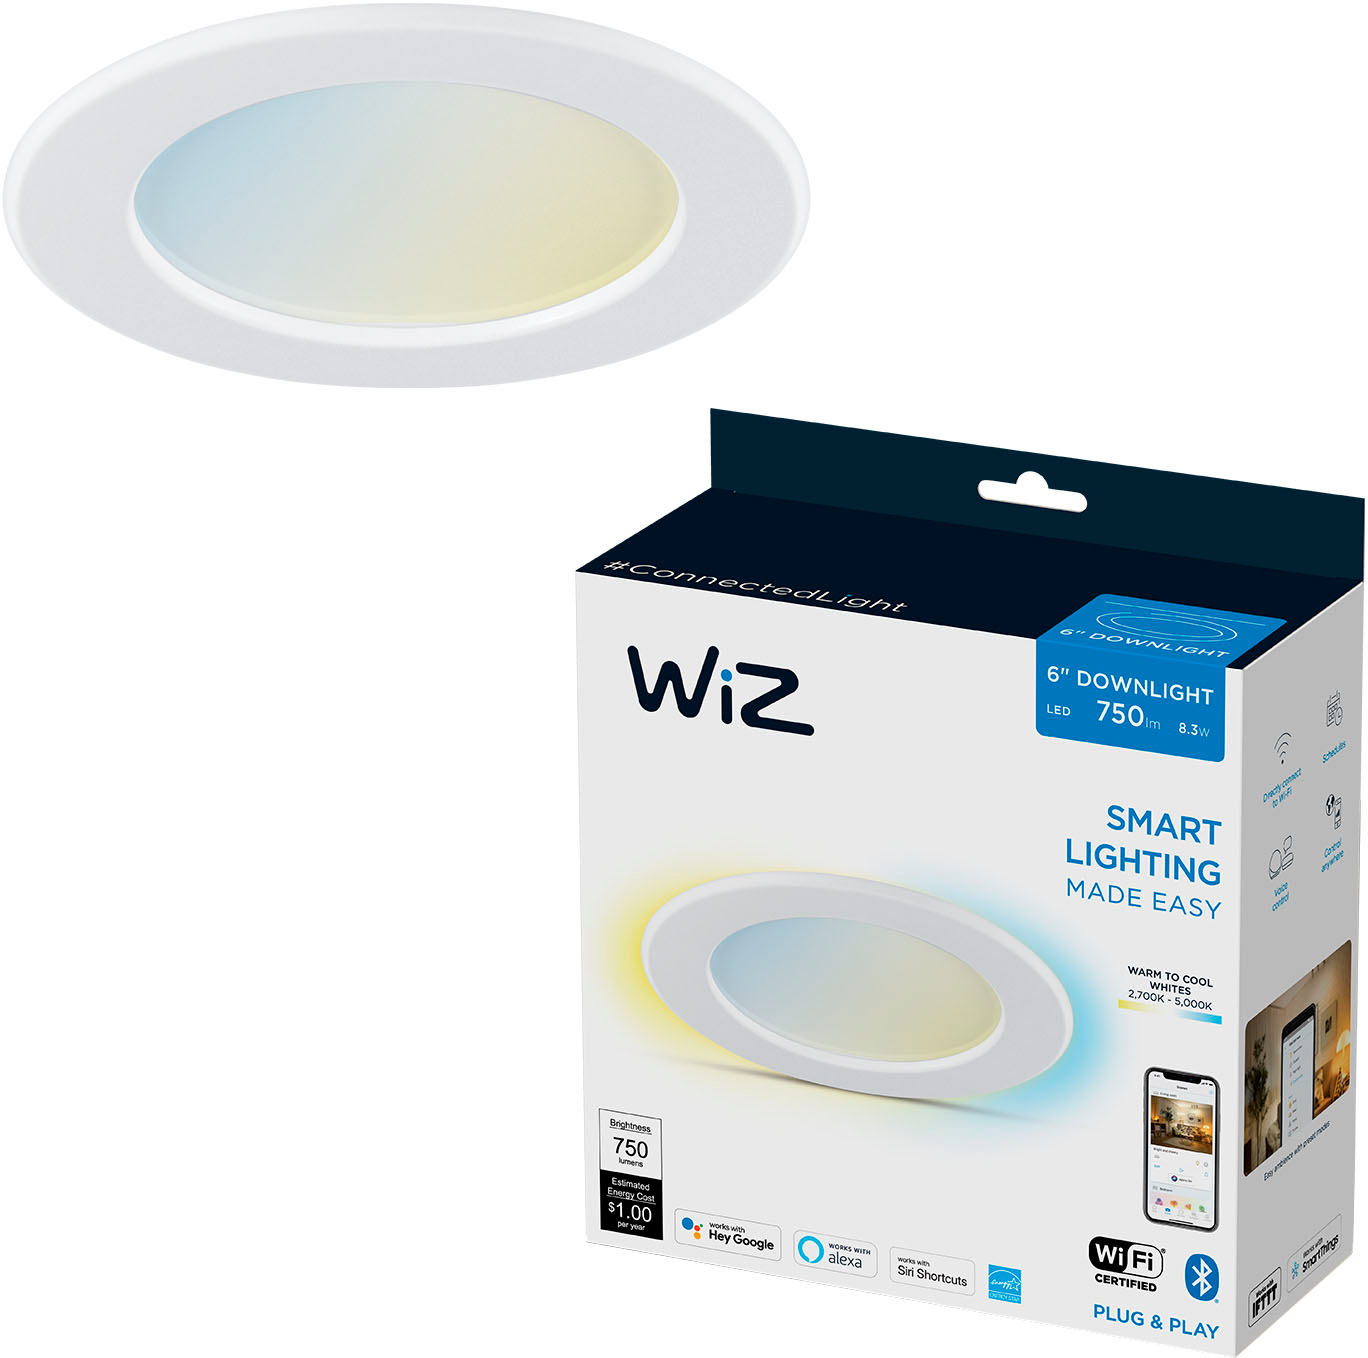 - Downlight LED Wi-Fi White Buy Best Tunable Recessed 604306 6\